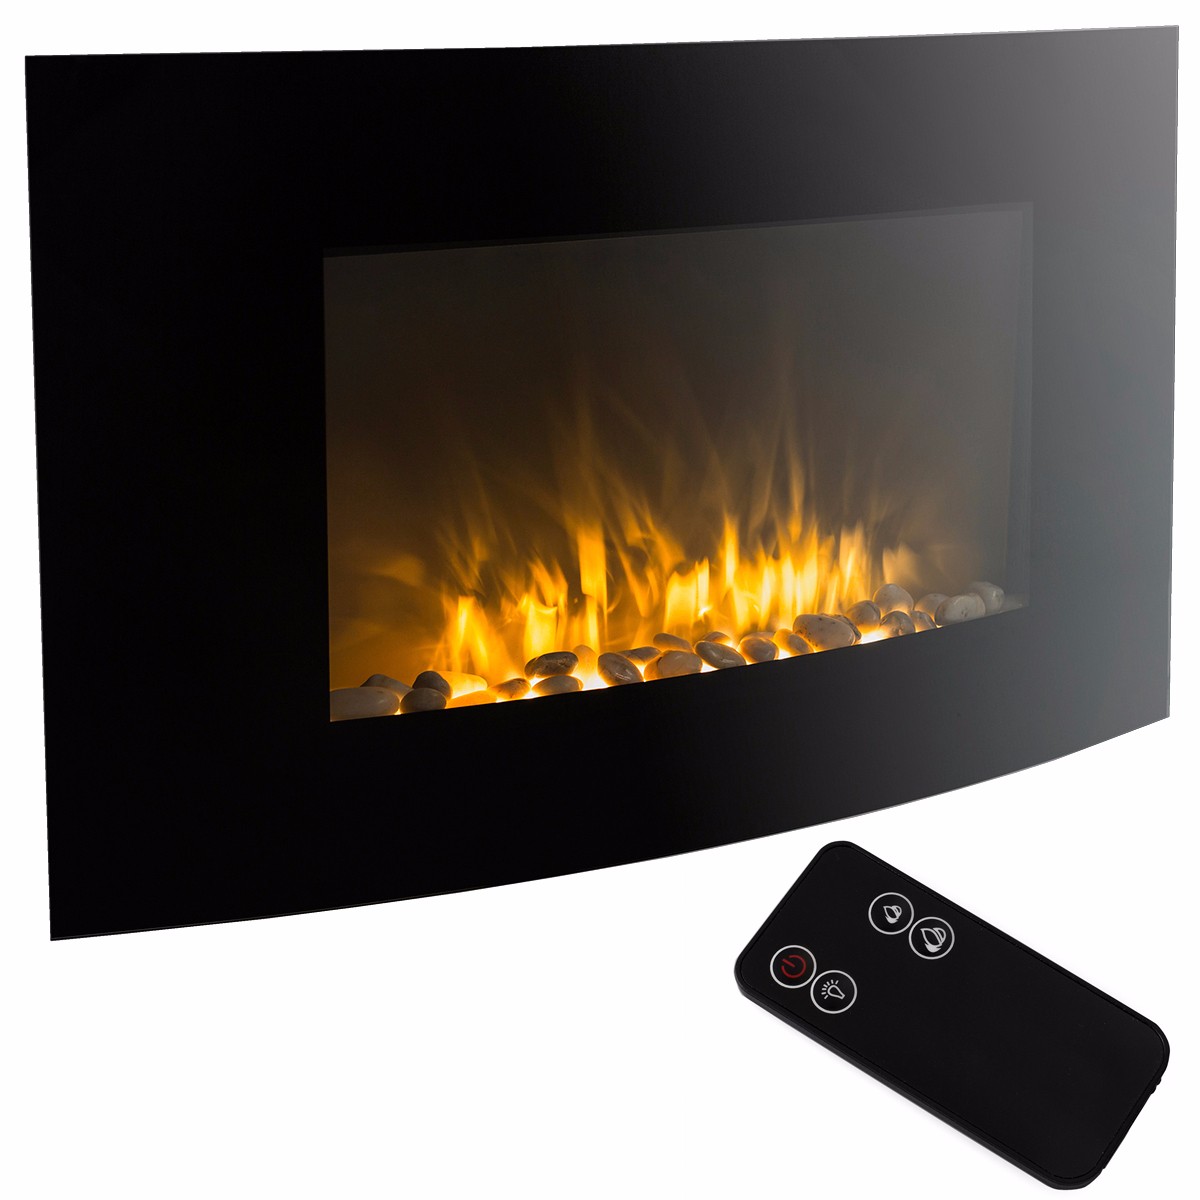 Duraflame Fireplace New Electric Fireplace Insert with Remote Control Fireplace